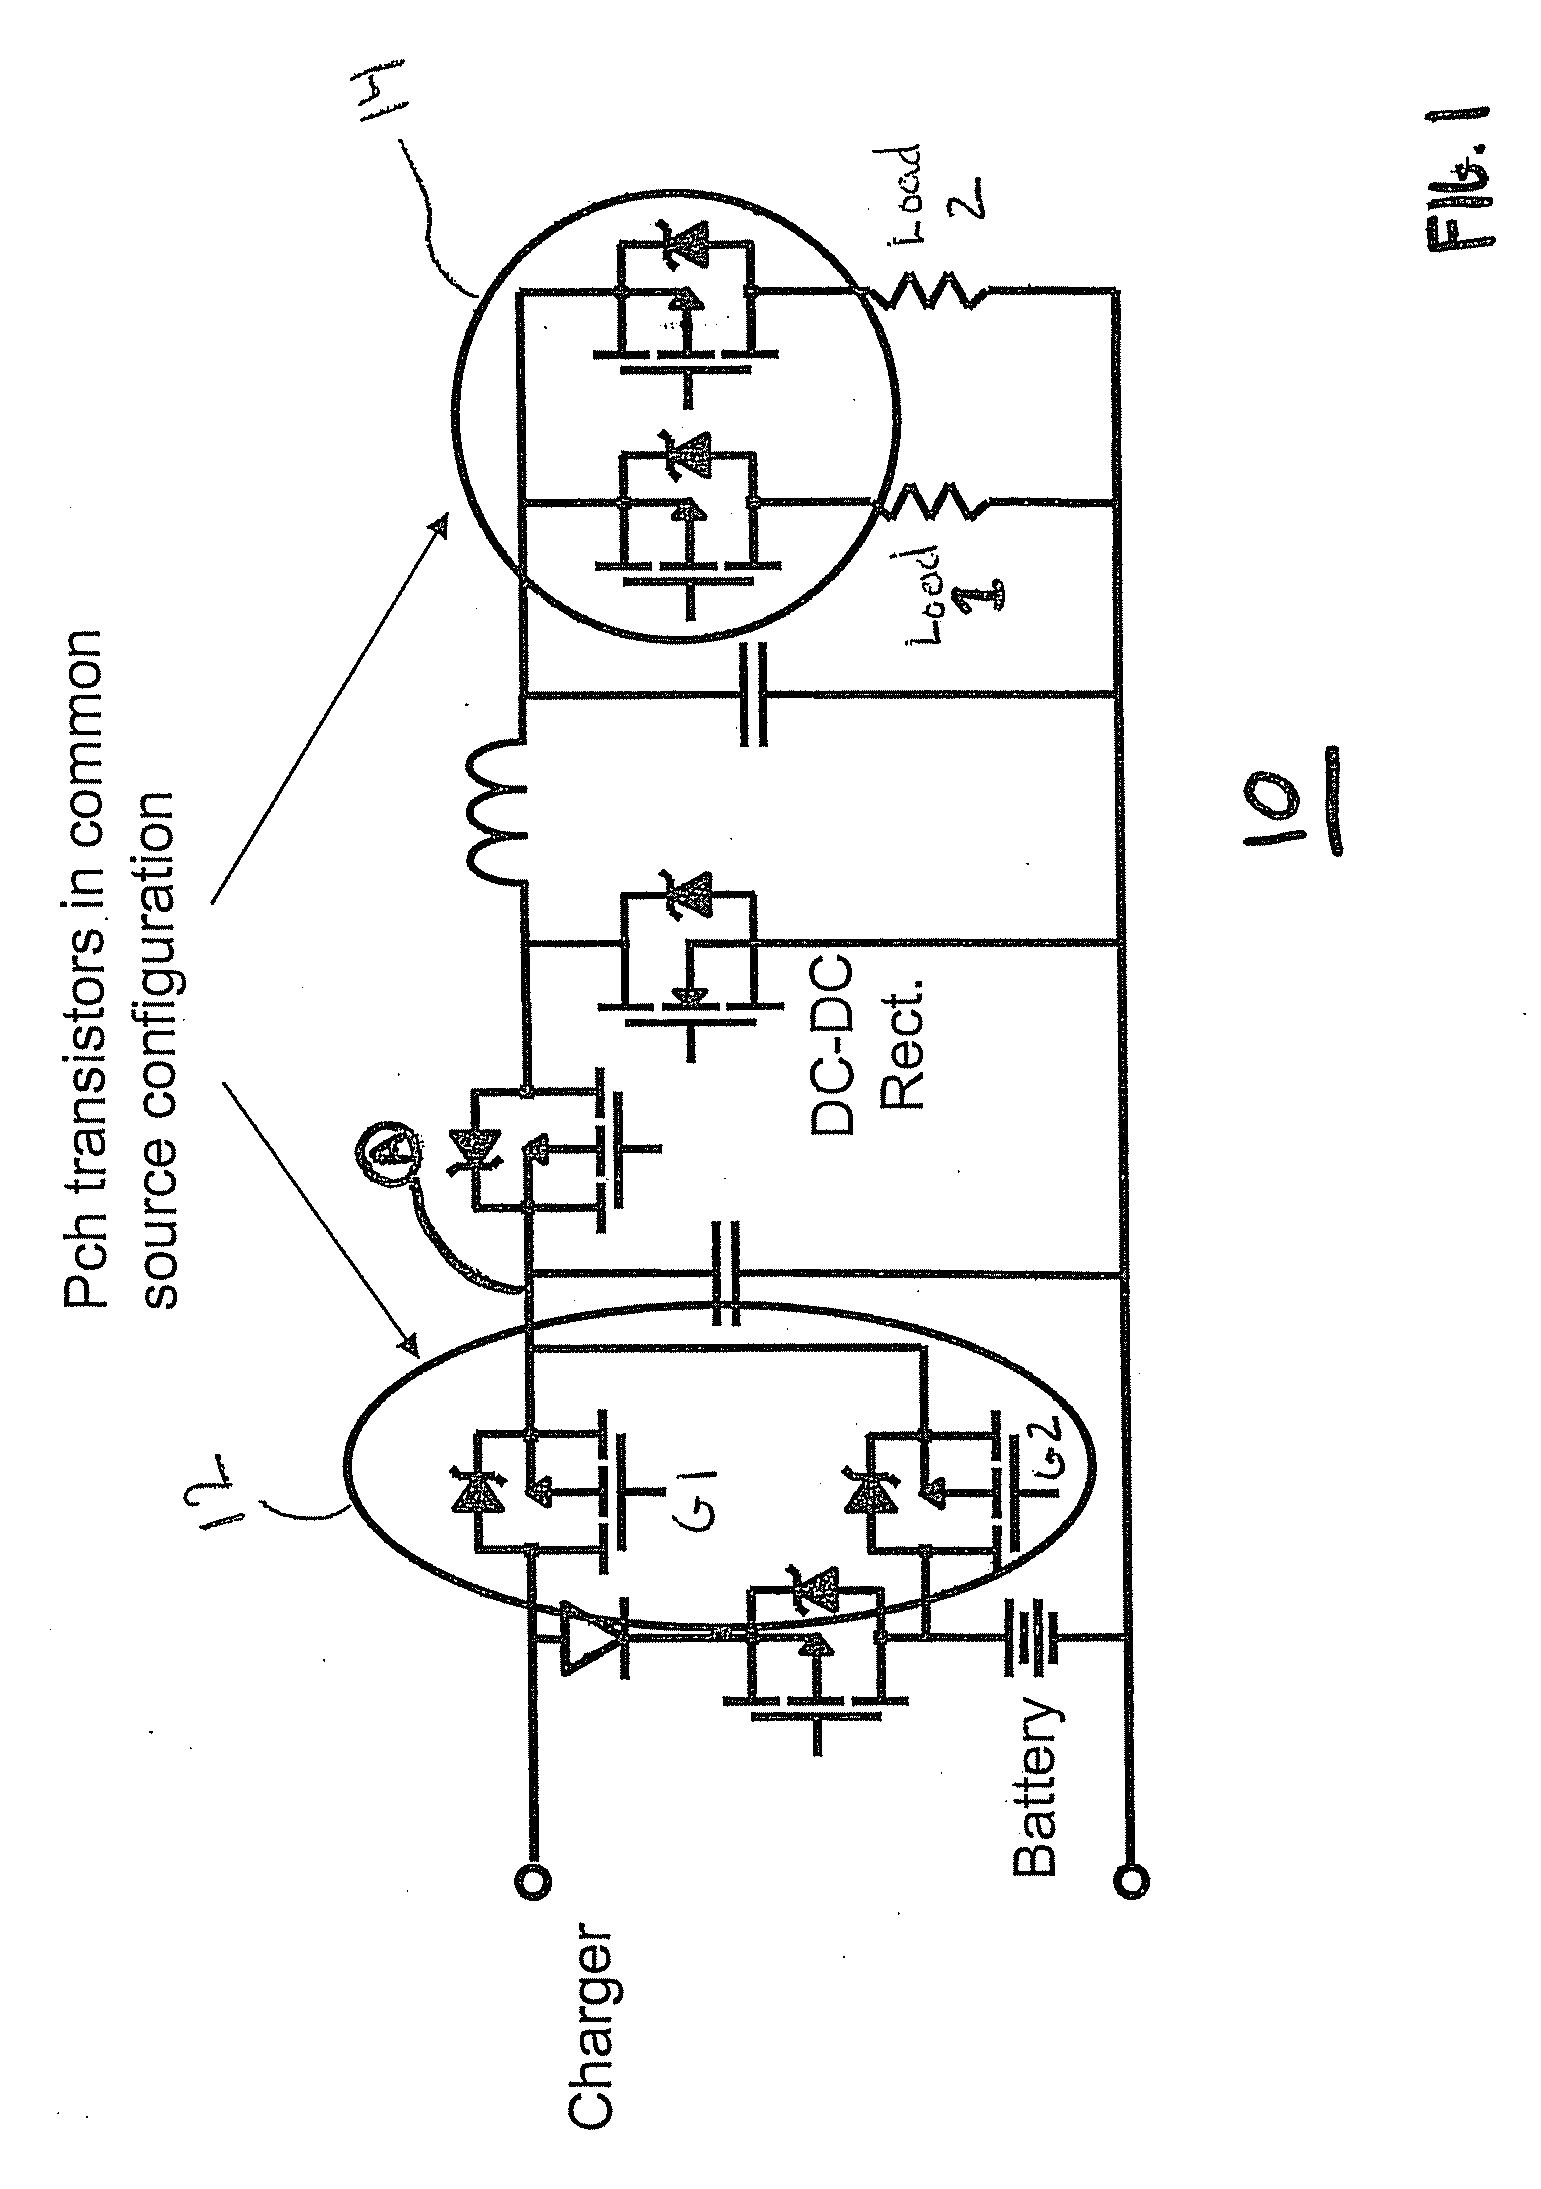 Mos transistor device in common source configuration